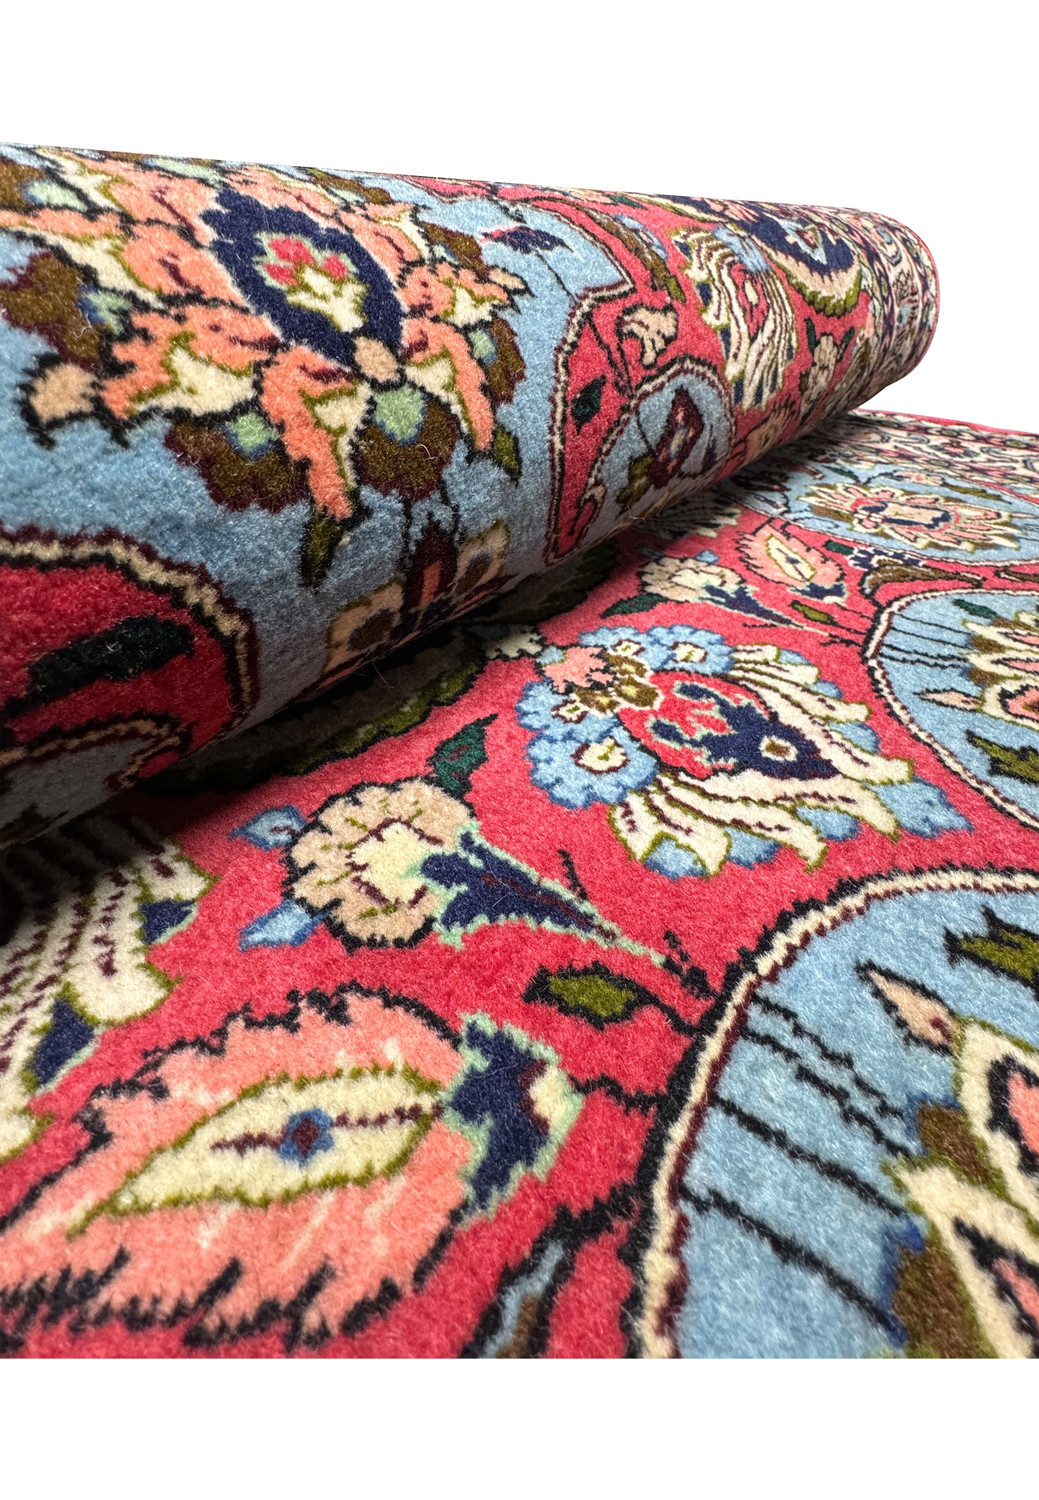 Side view of a rolled 3'7" x 5'2" Persian Bijar rug, exhibiting the thickness and tight weaving that contribute to its reputation as the 'Iron Rug of Persia